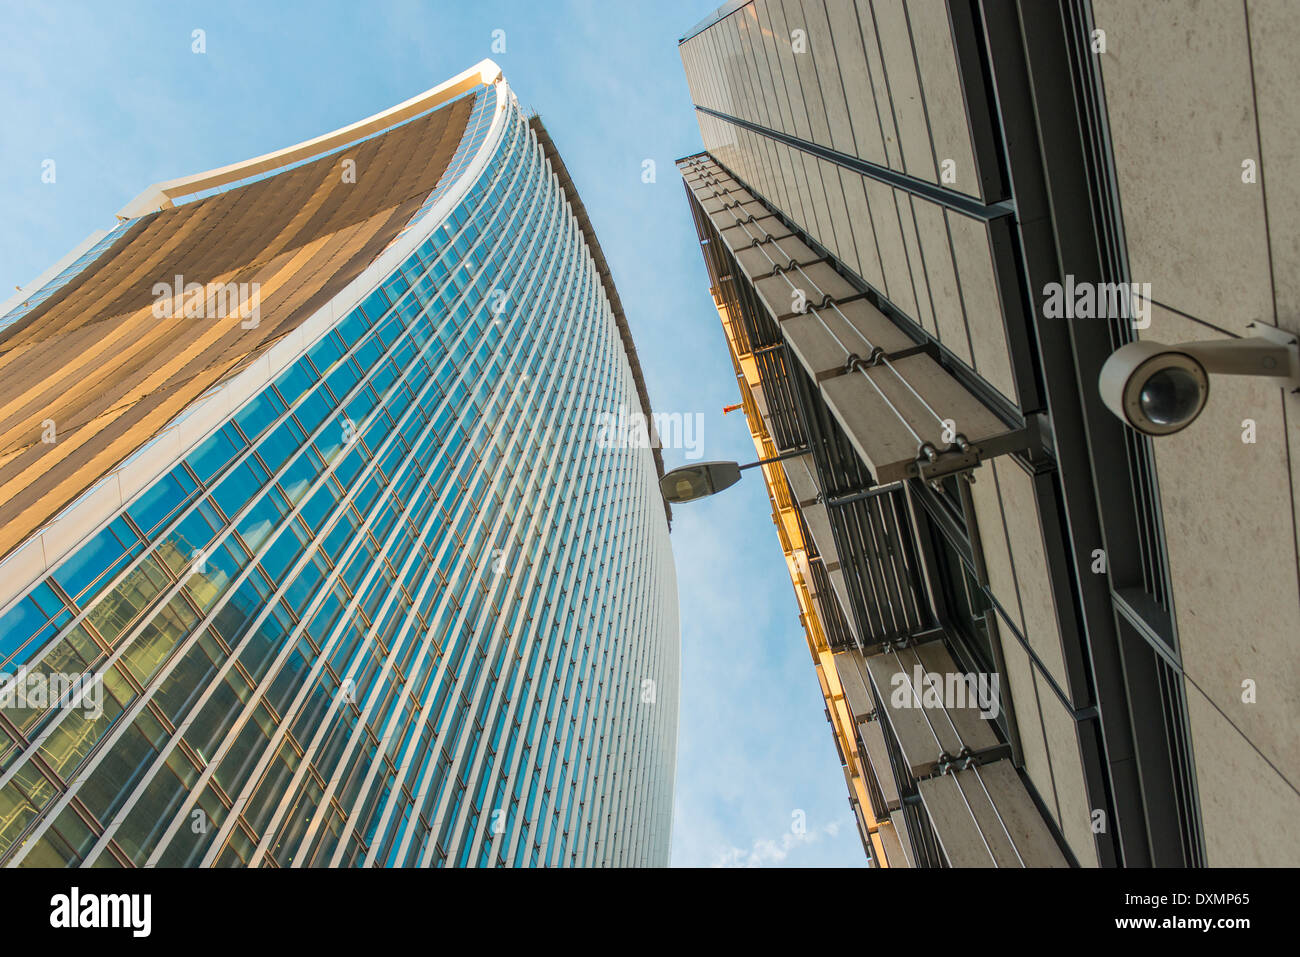 20 Fernchurch street-'the Walkie -Talkie' building,City of London,England Stock Photo